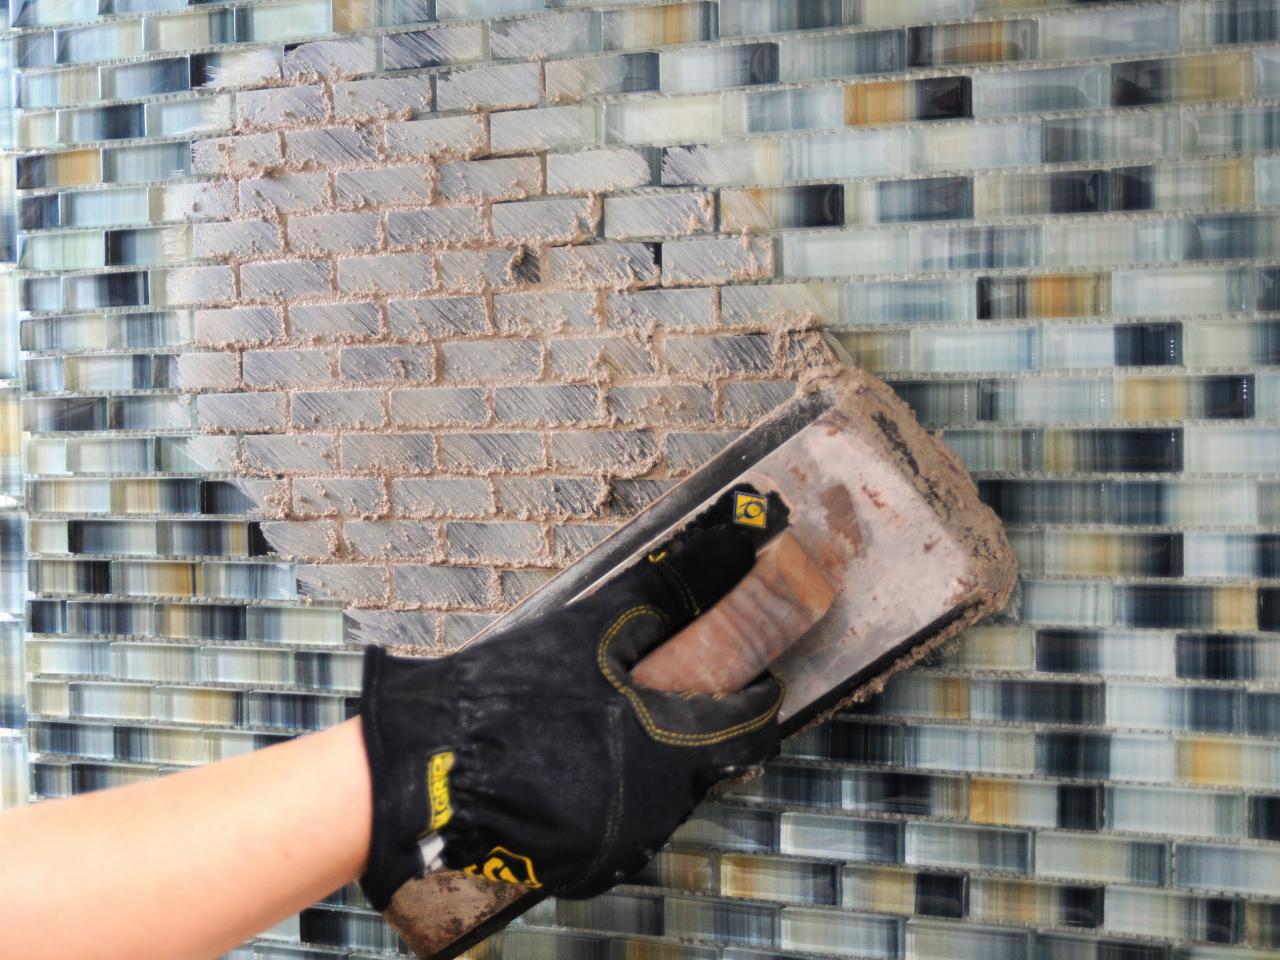 How To Install A Tile Backsplash, How To Measure For Subway Tile